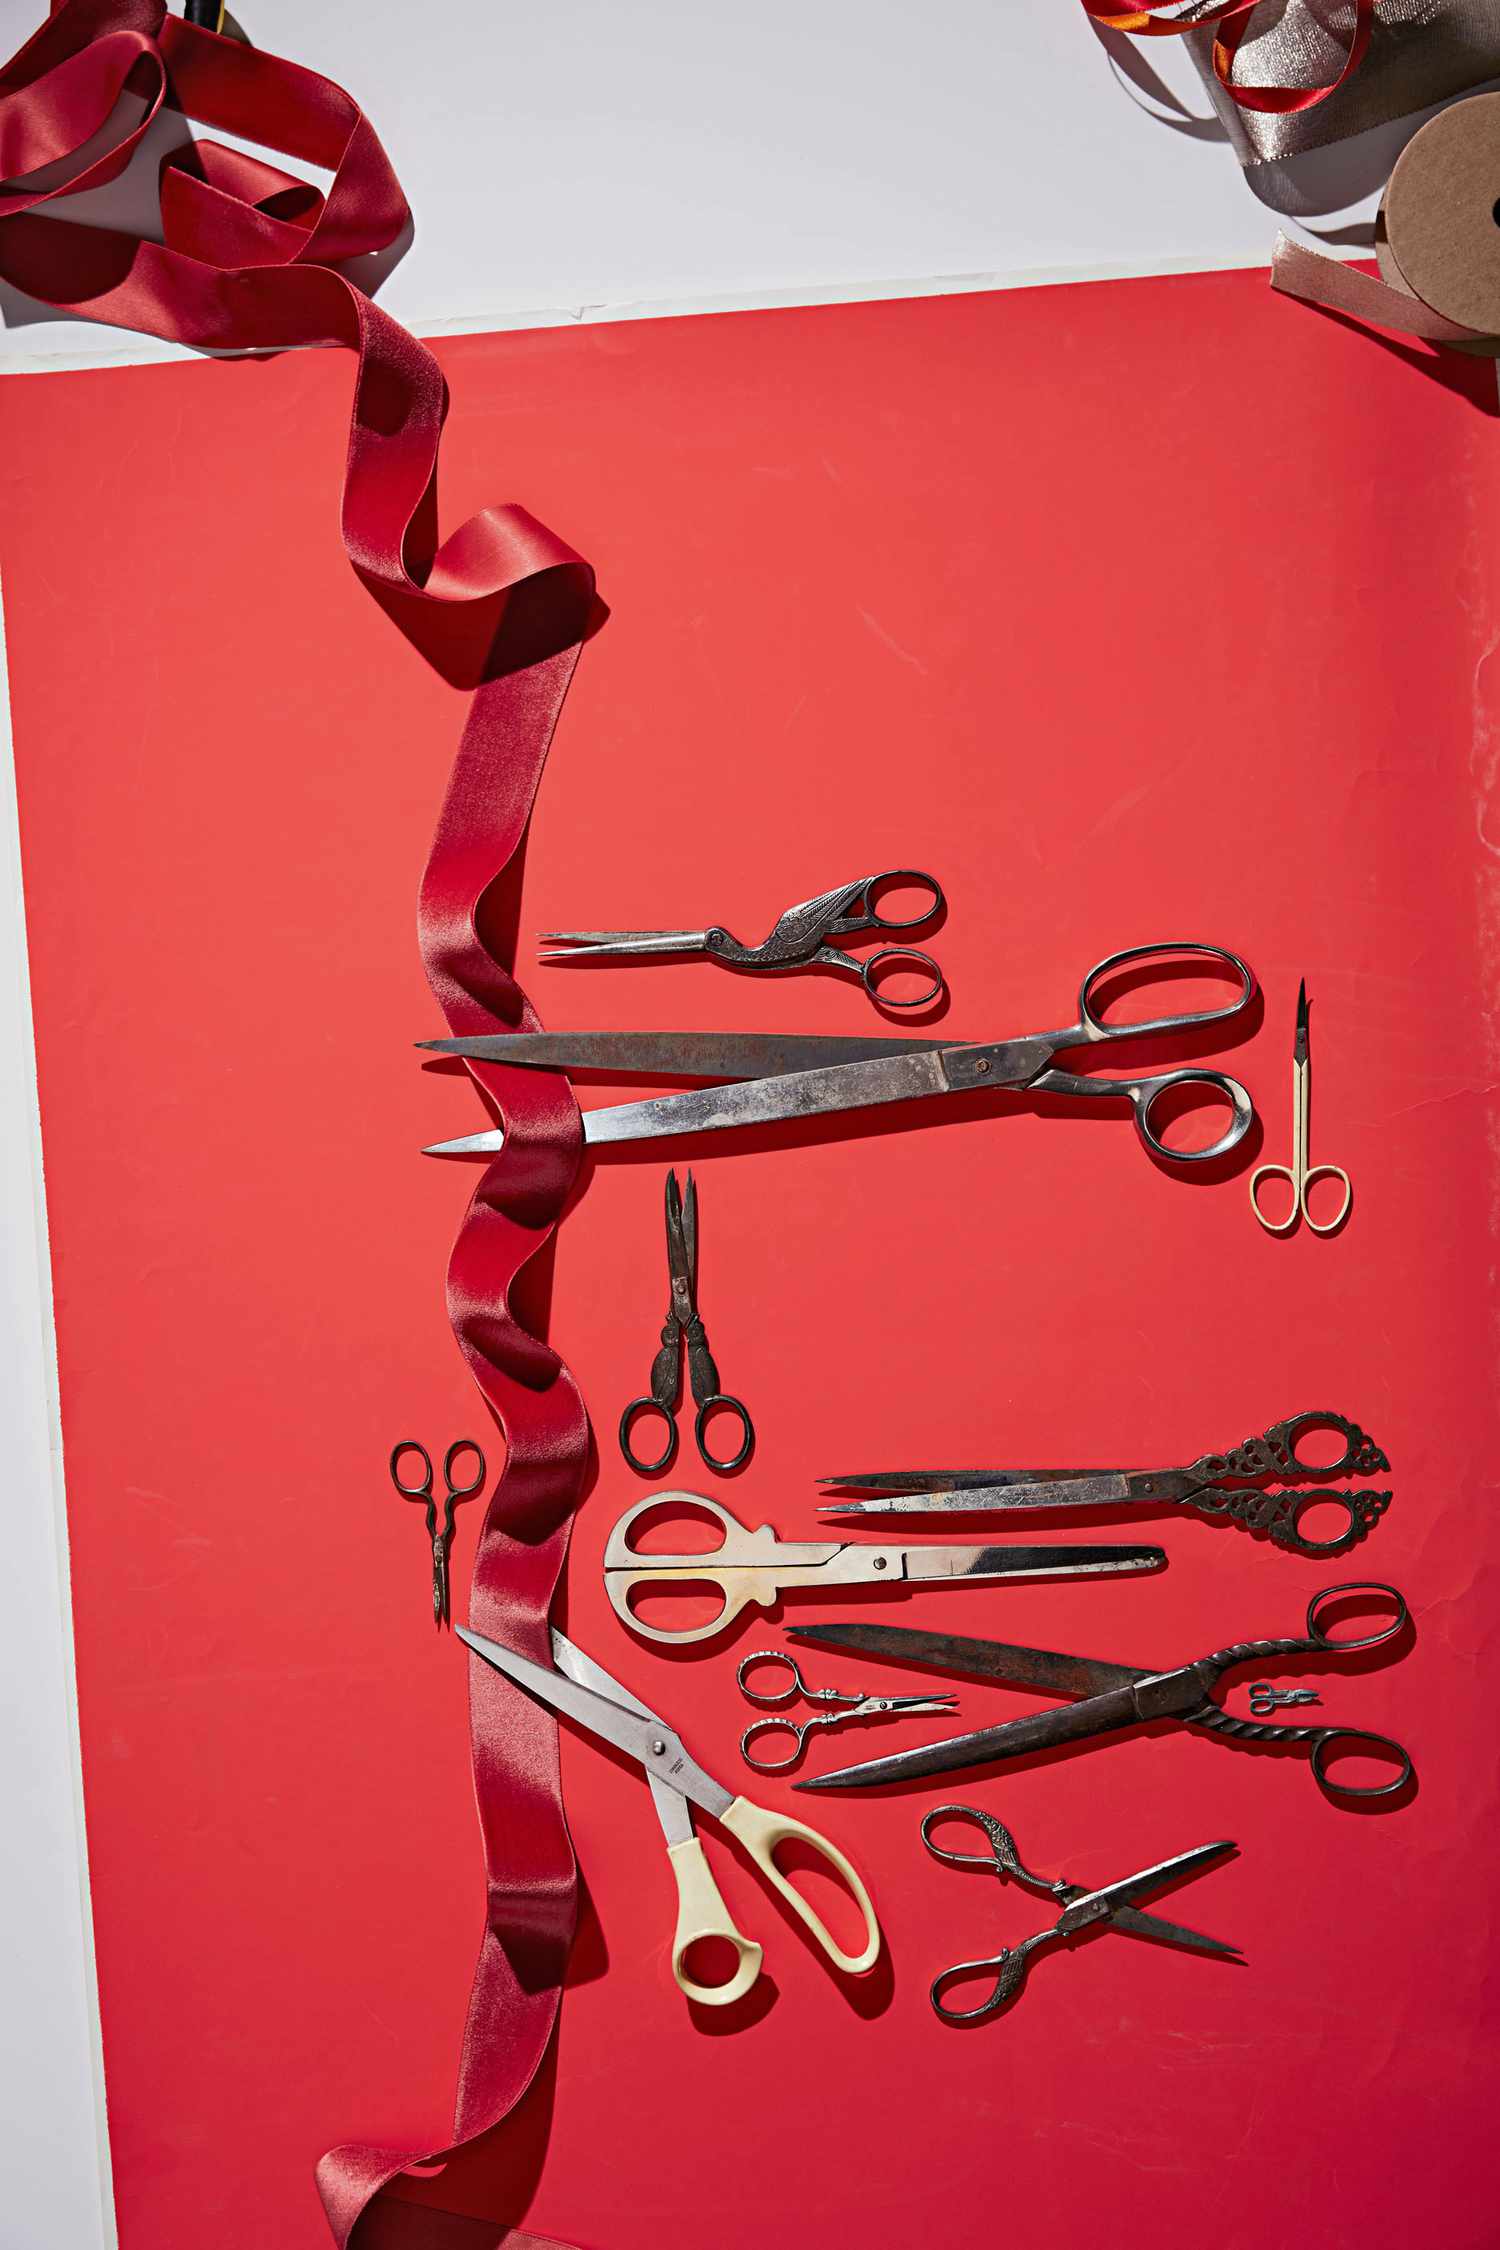 How to Sharpen, Clean, and Care for Your Scissors | Martha Stewart